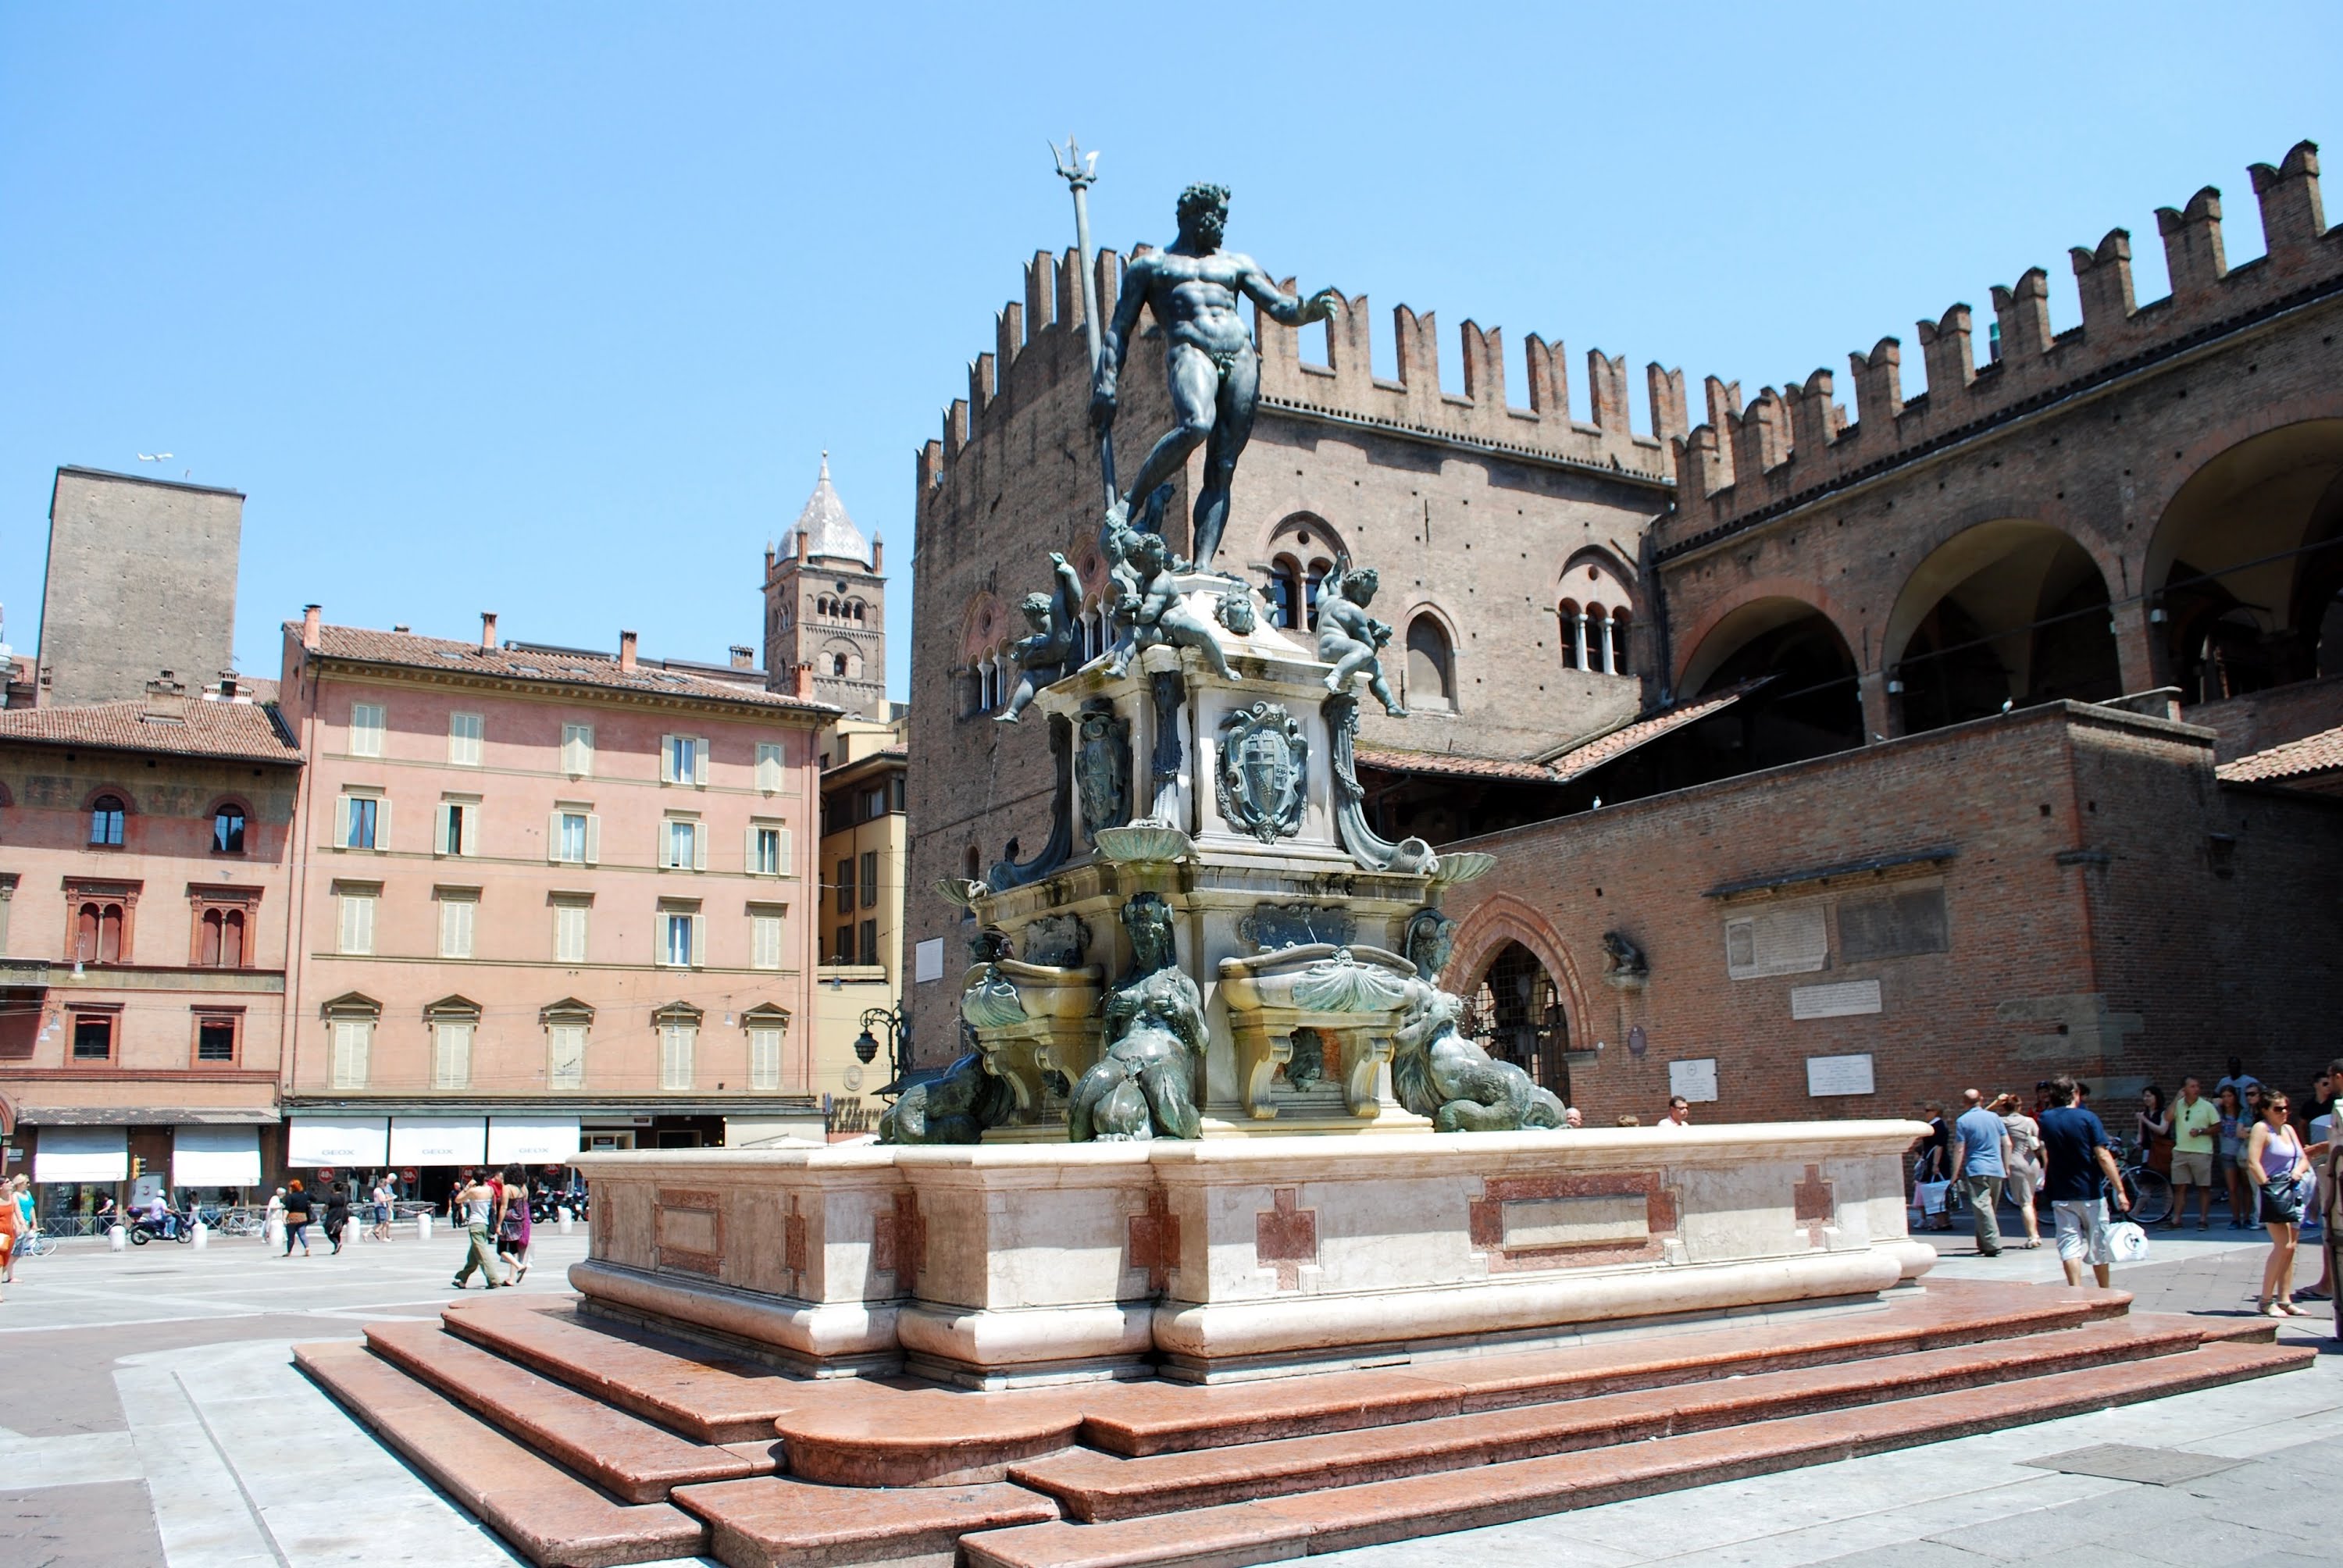 Piazza Duomo and the fountain of Neptune